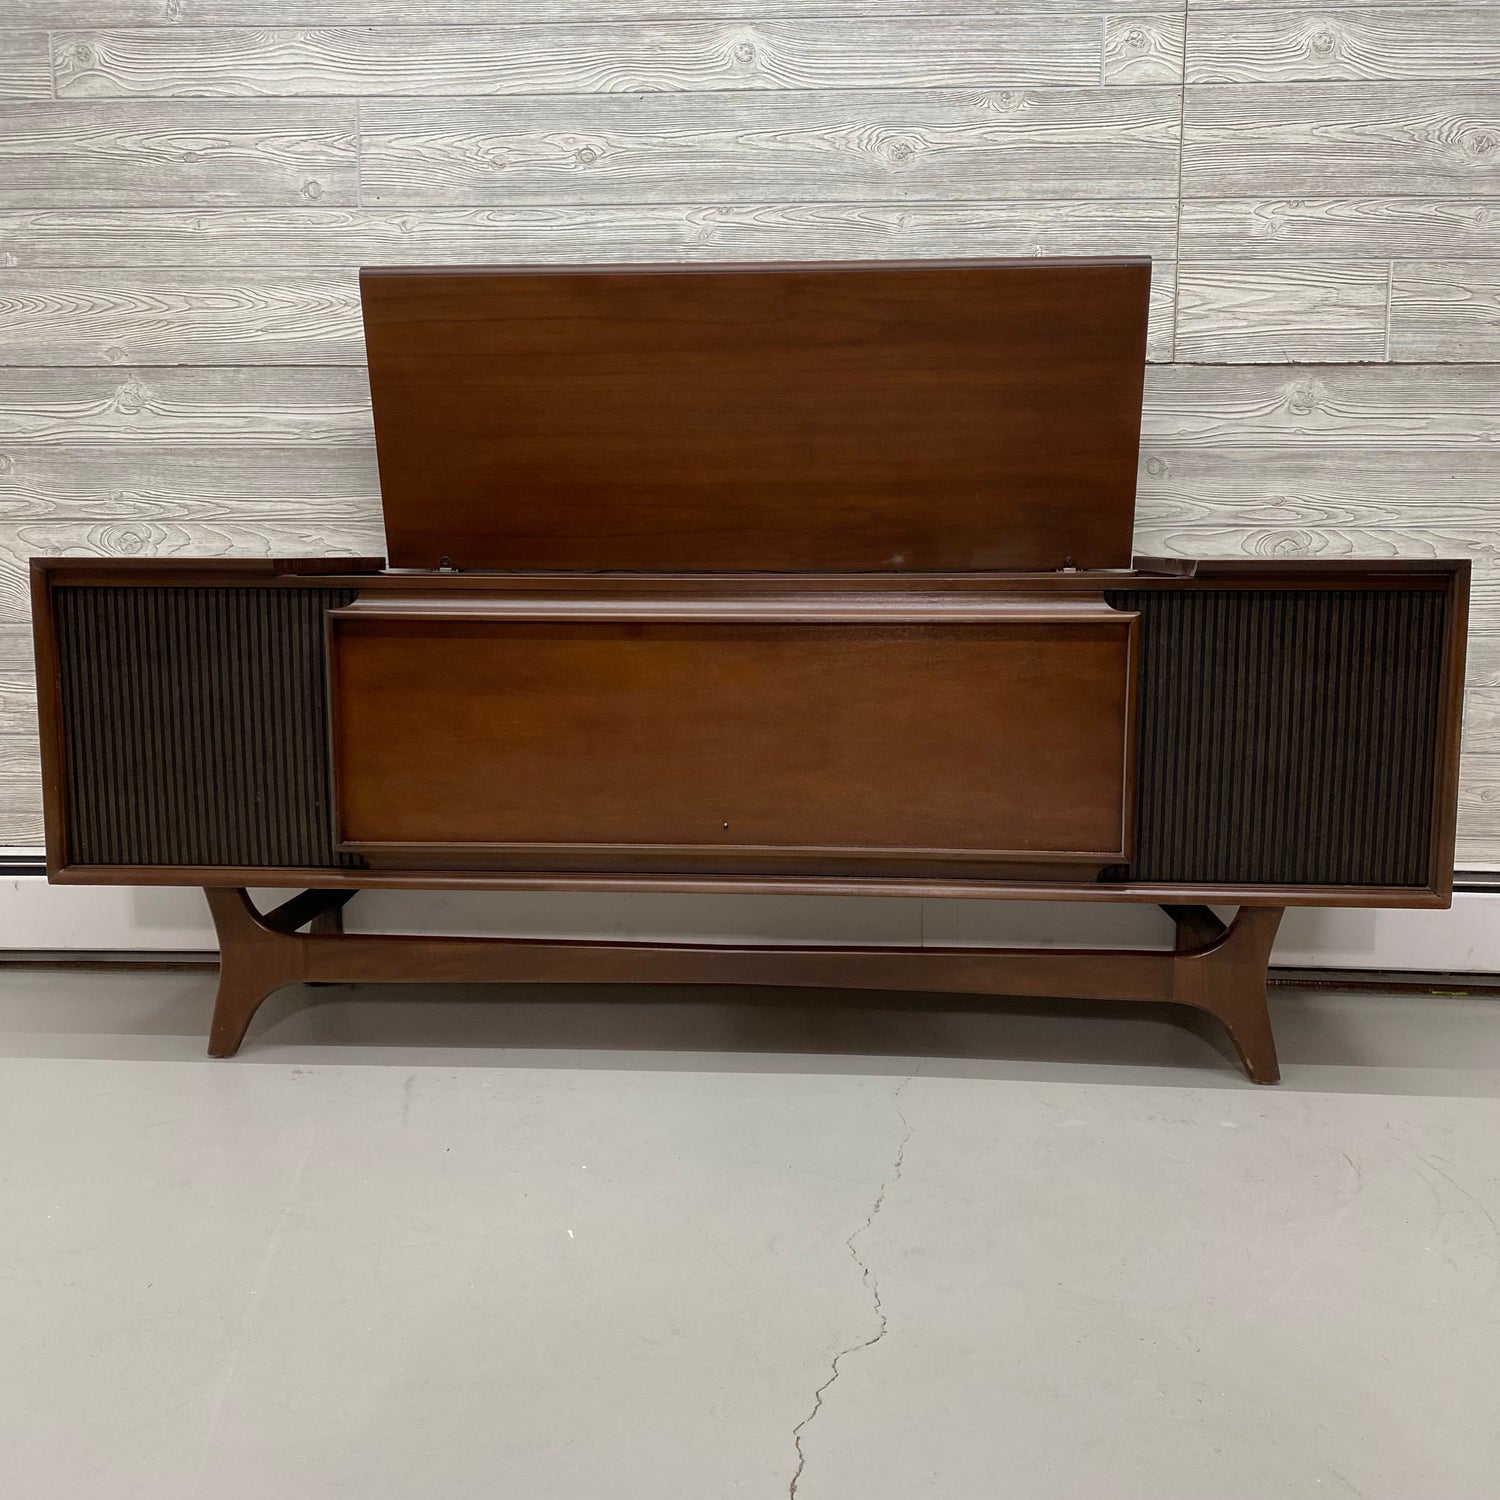 SOLD OUT!!! GE General Electric Mid Century Long and Low Stereo Console Record Player Changer AM FM Bluetooth The Vintedge Co.